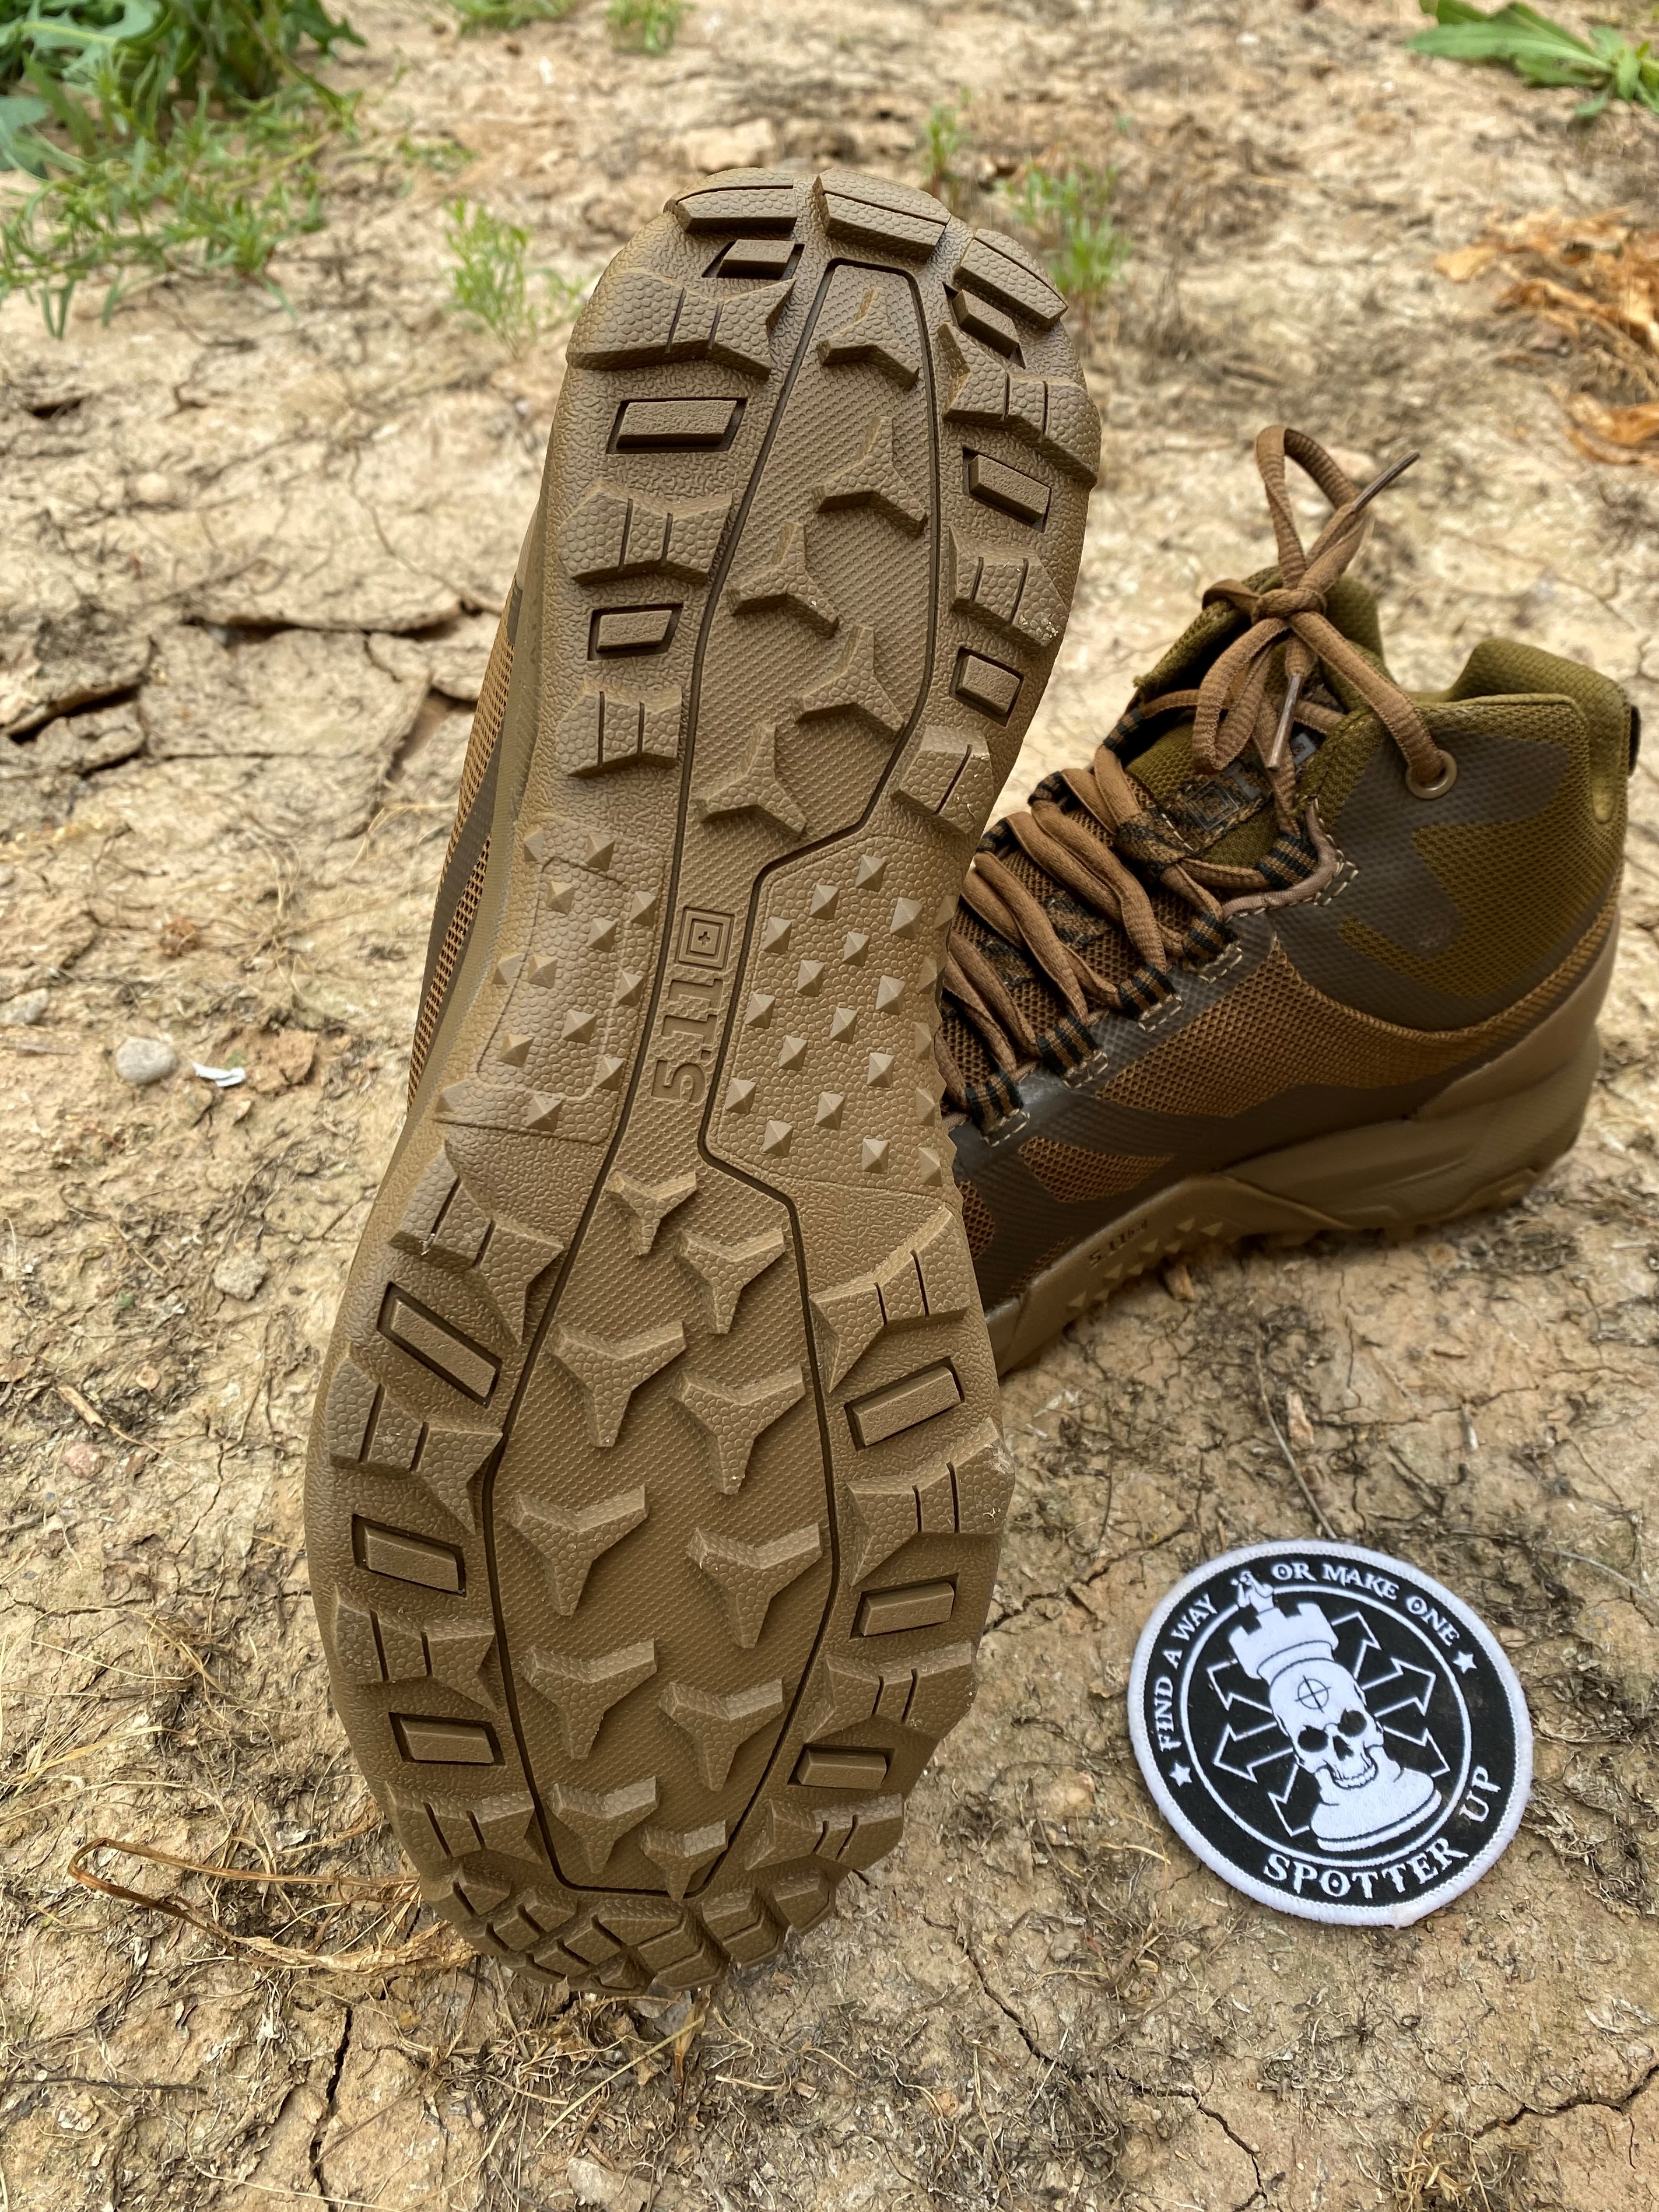 5.11 Tactical A.T.L.A.S. Mid Boot Sole Tread • Spotter Up